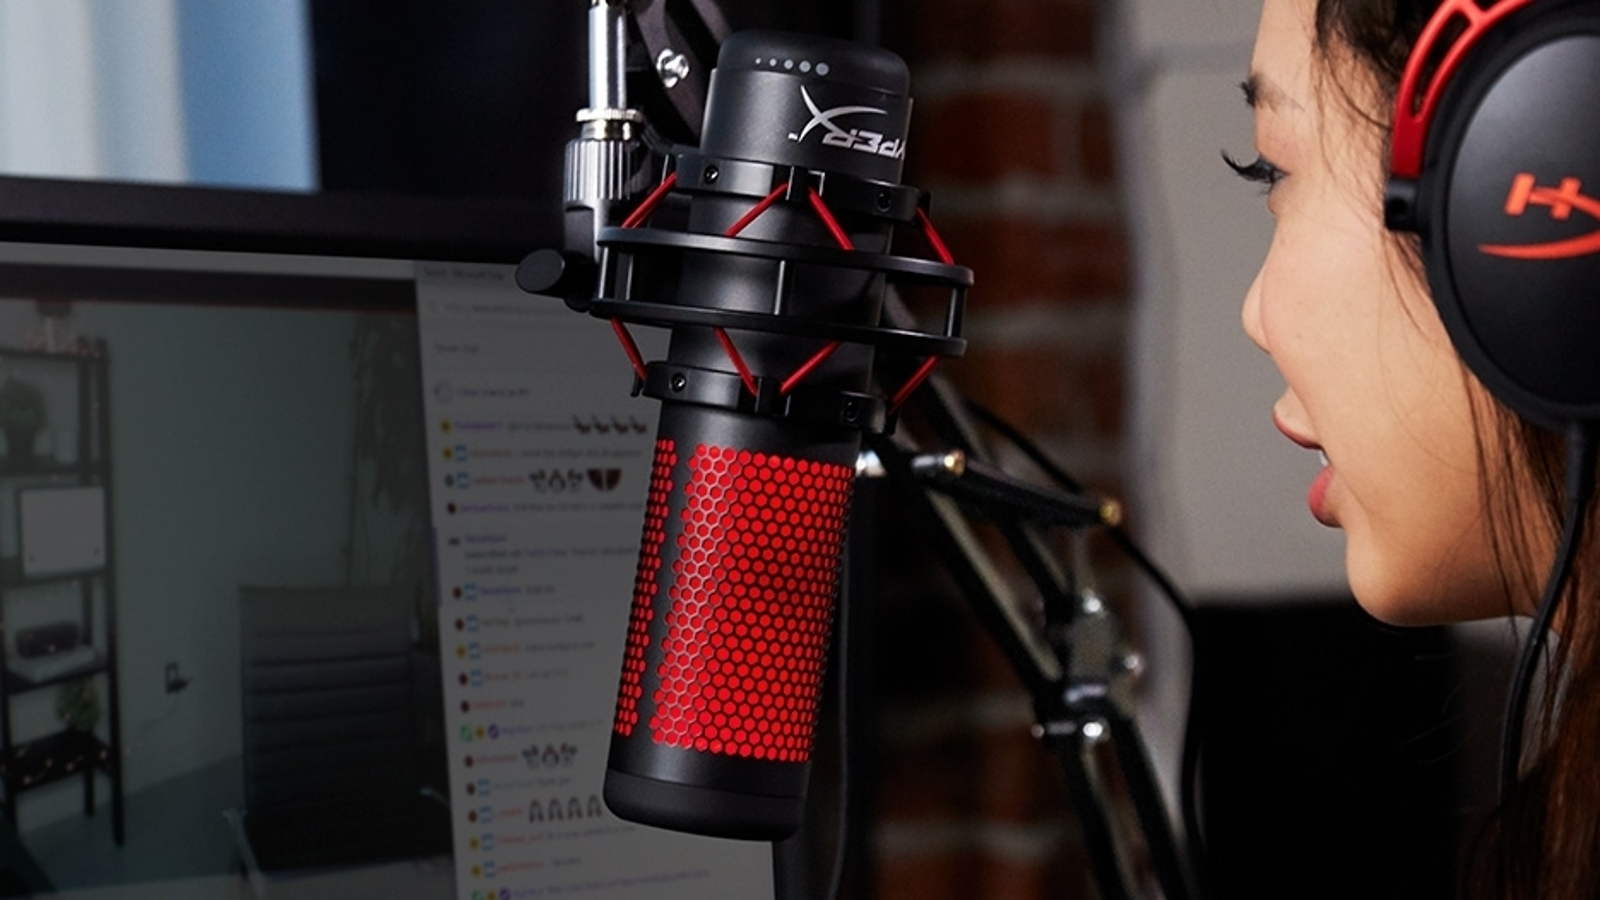 https://assetsio.reedpopcdn.com/best-gaming-mic-2019-xlr-and-usb-microphones-for-streaming-and-youtube-1554302497029.jpg?width=1600&height=900&fit=crop&quality=100&format=png&enable=upscale&auto=webp